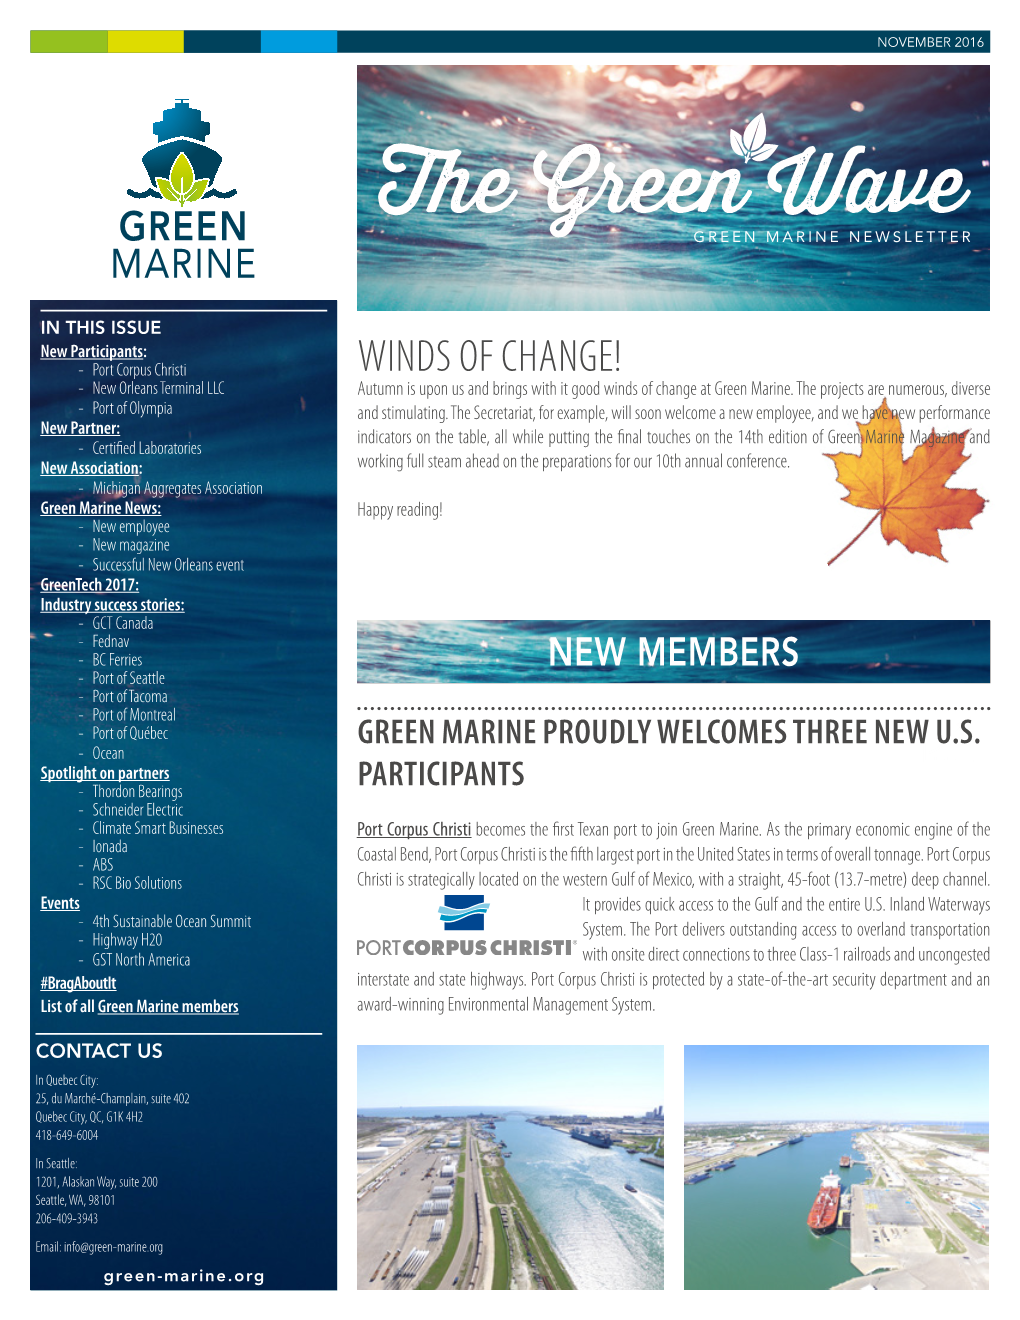 WINDS of CHANGE! - New Orleans Terminal LLC Autumn Is Upon Us and Brings with It Good Winds of Change at Green Marine